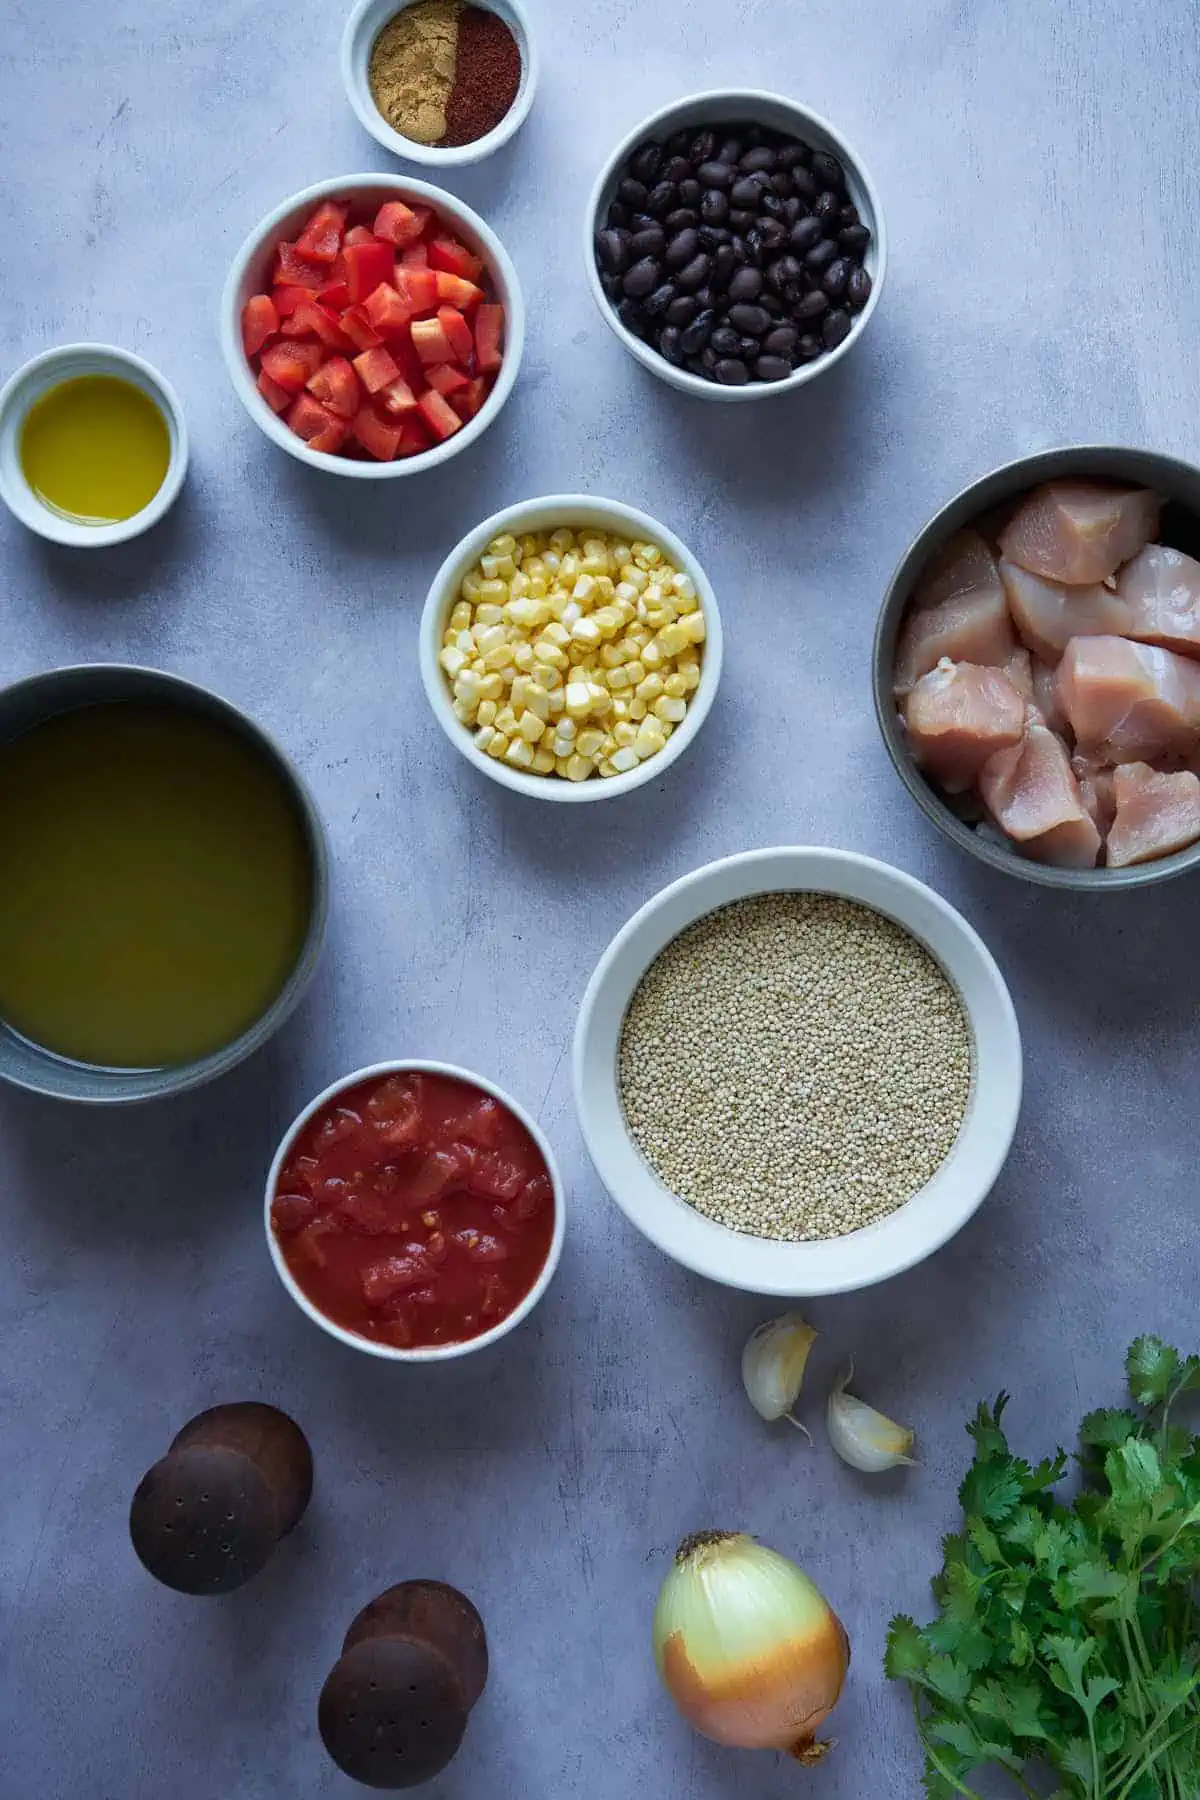 Ingredients to make a delicious quinoa dish in the instant pot all measure.